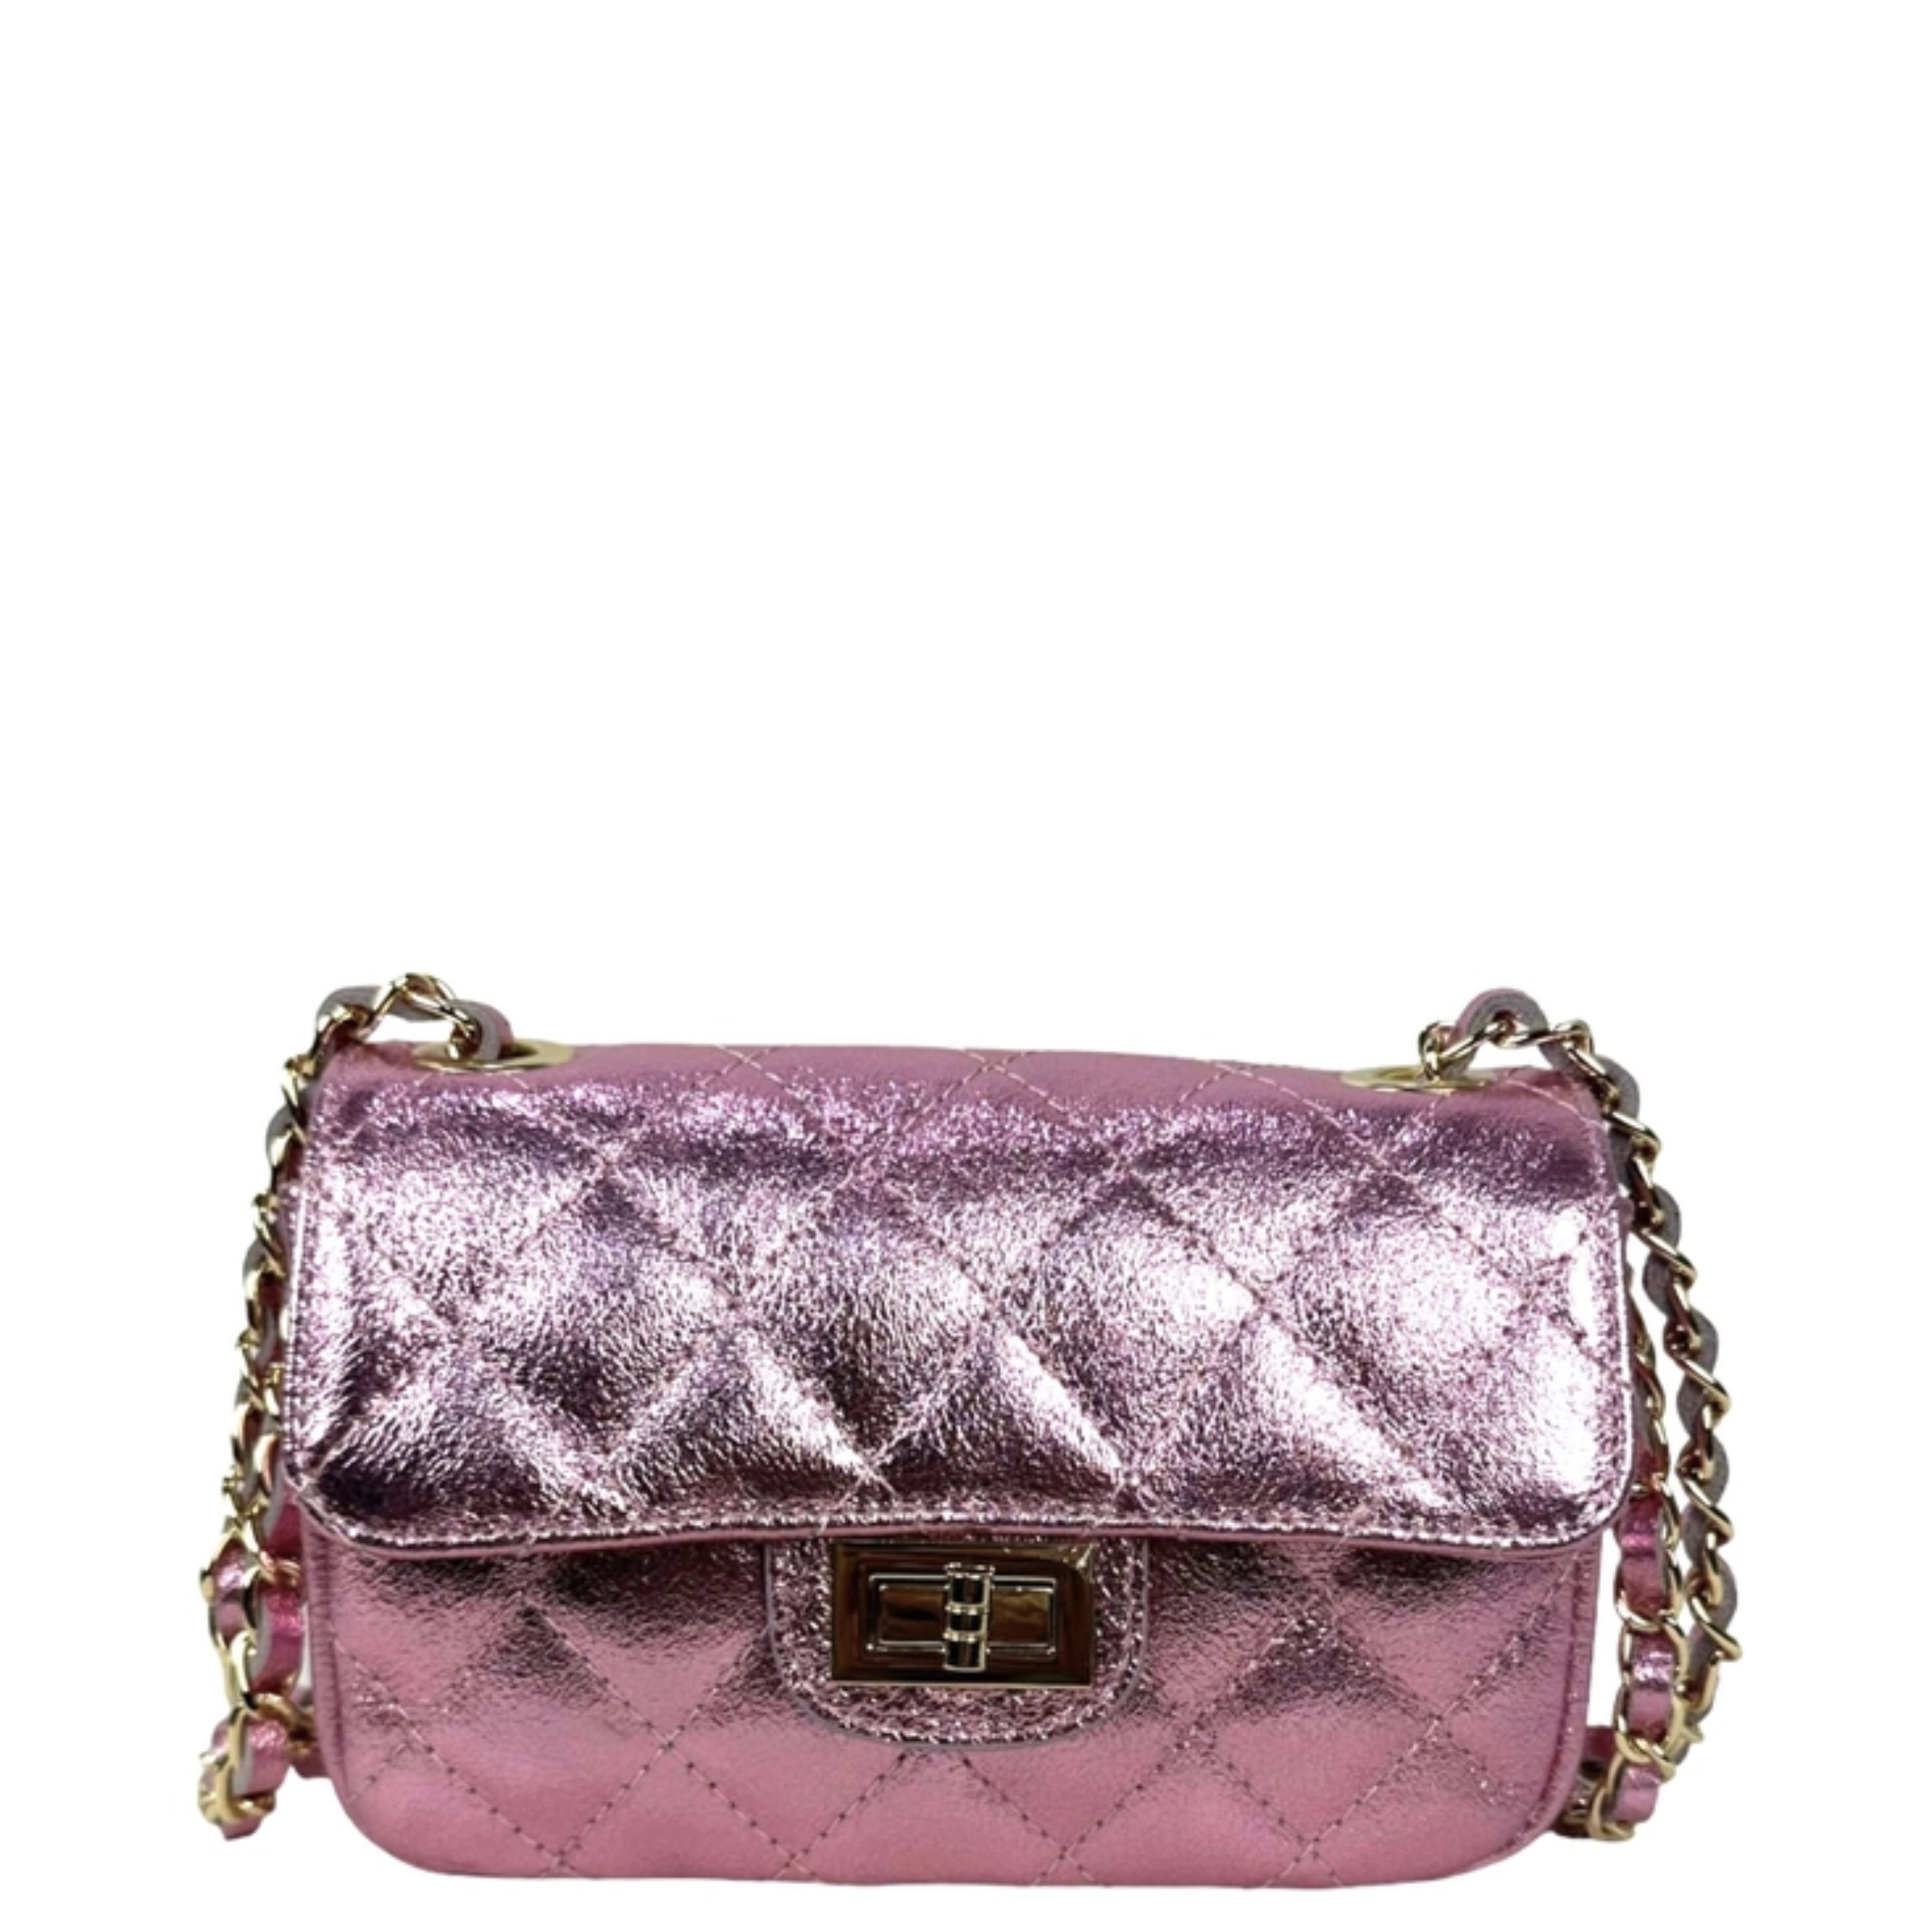 Metallic Quilted Italian Leather Bag